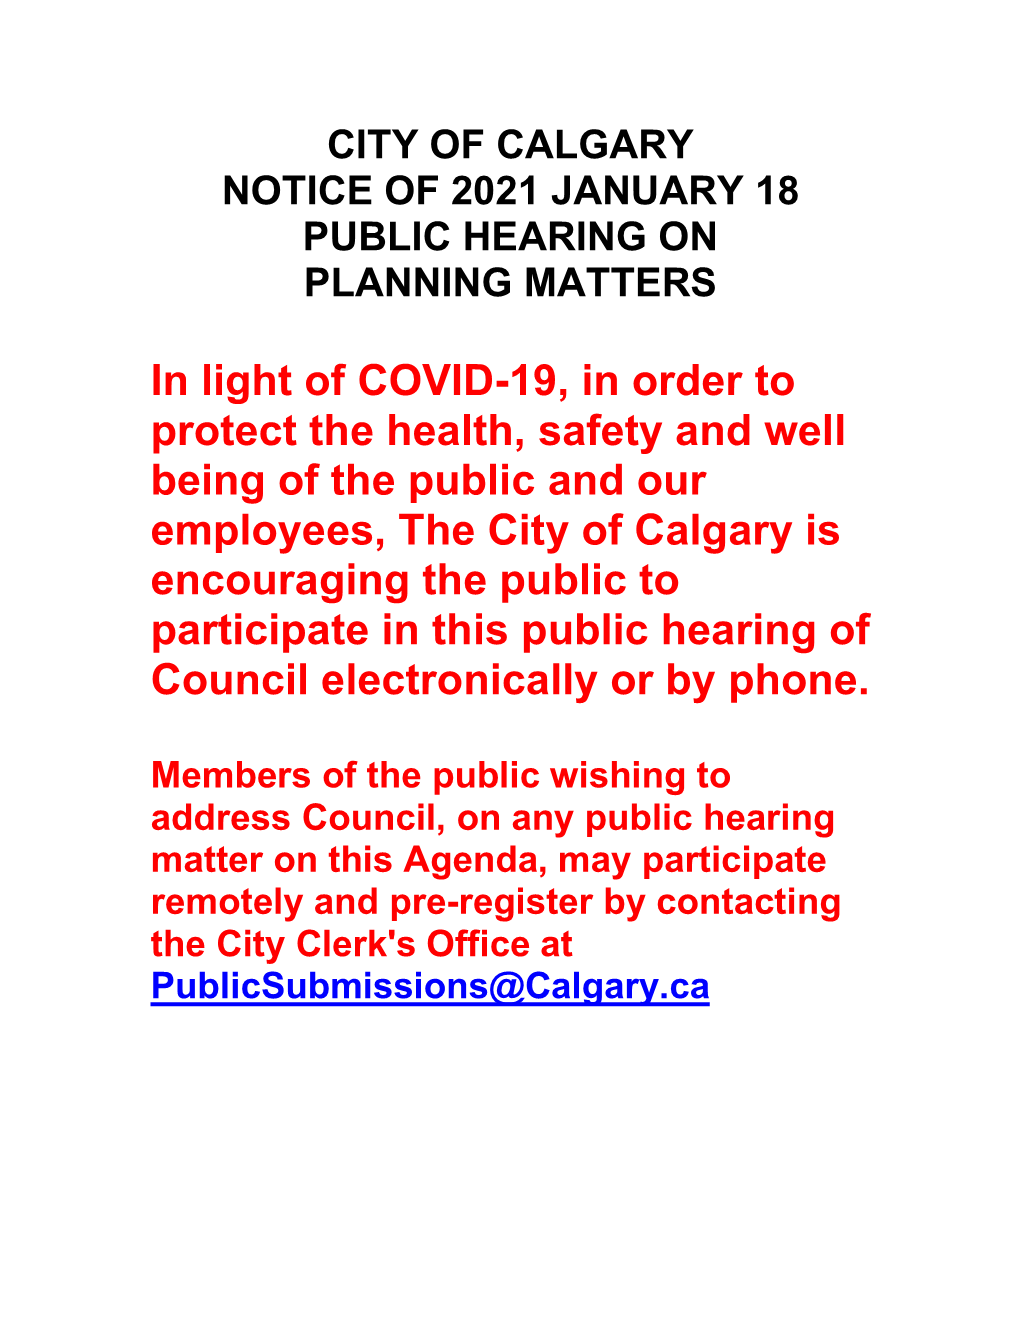 Public Hearing on Planning Matters: January 18Th